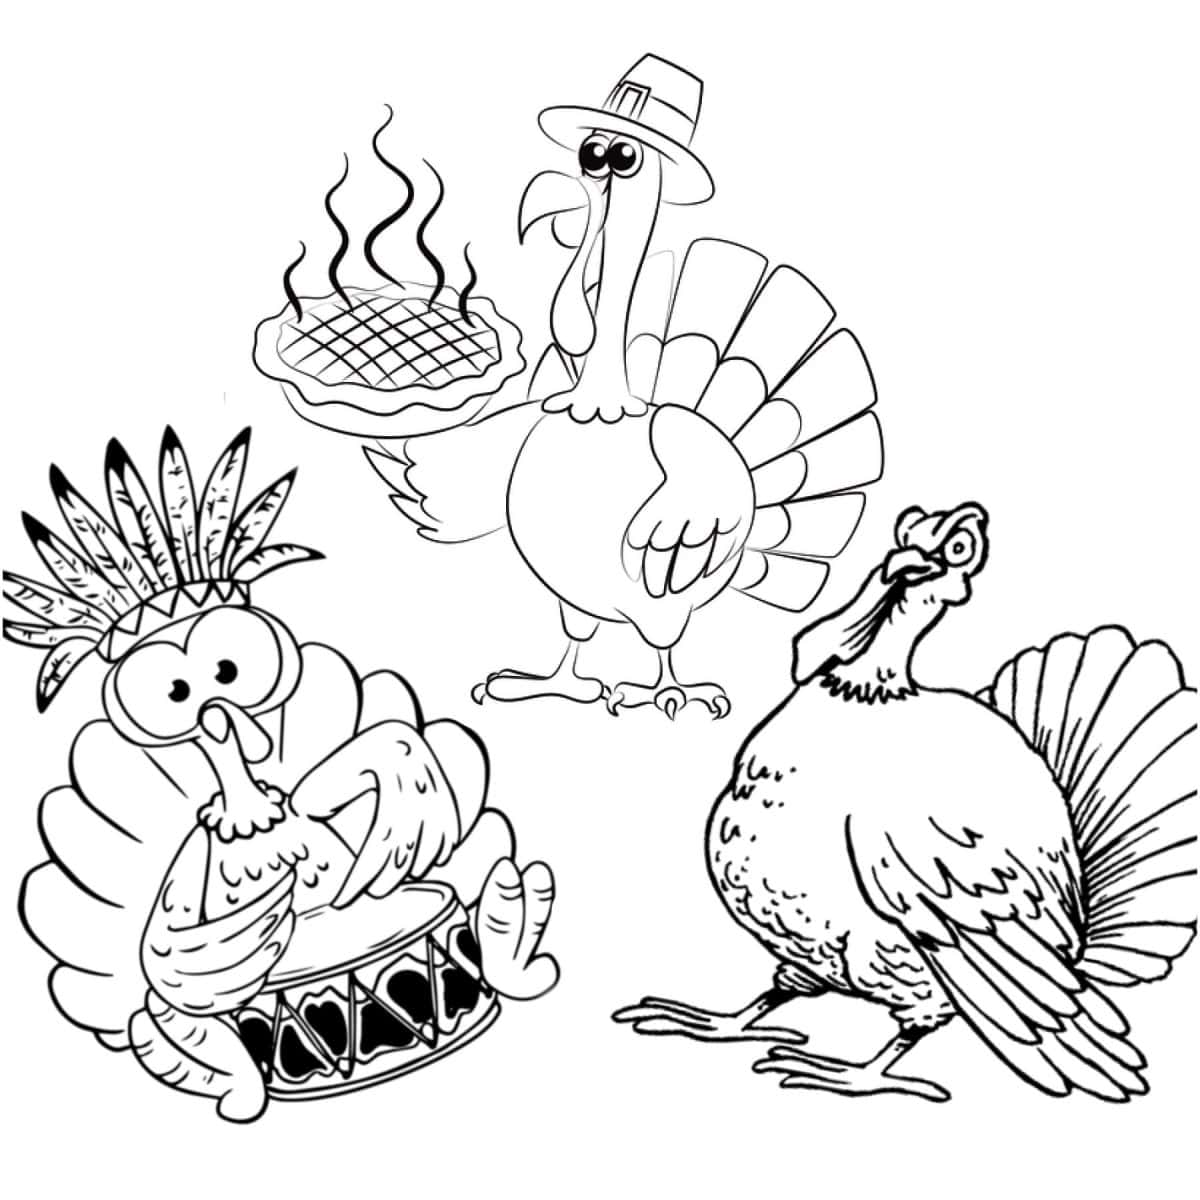 Adorable thanksgiving turkey coloring pages for free artsy pretty plants